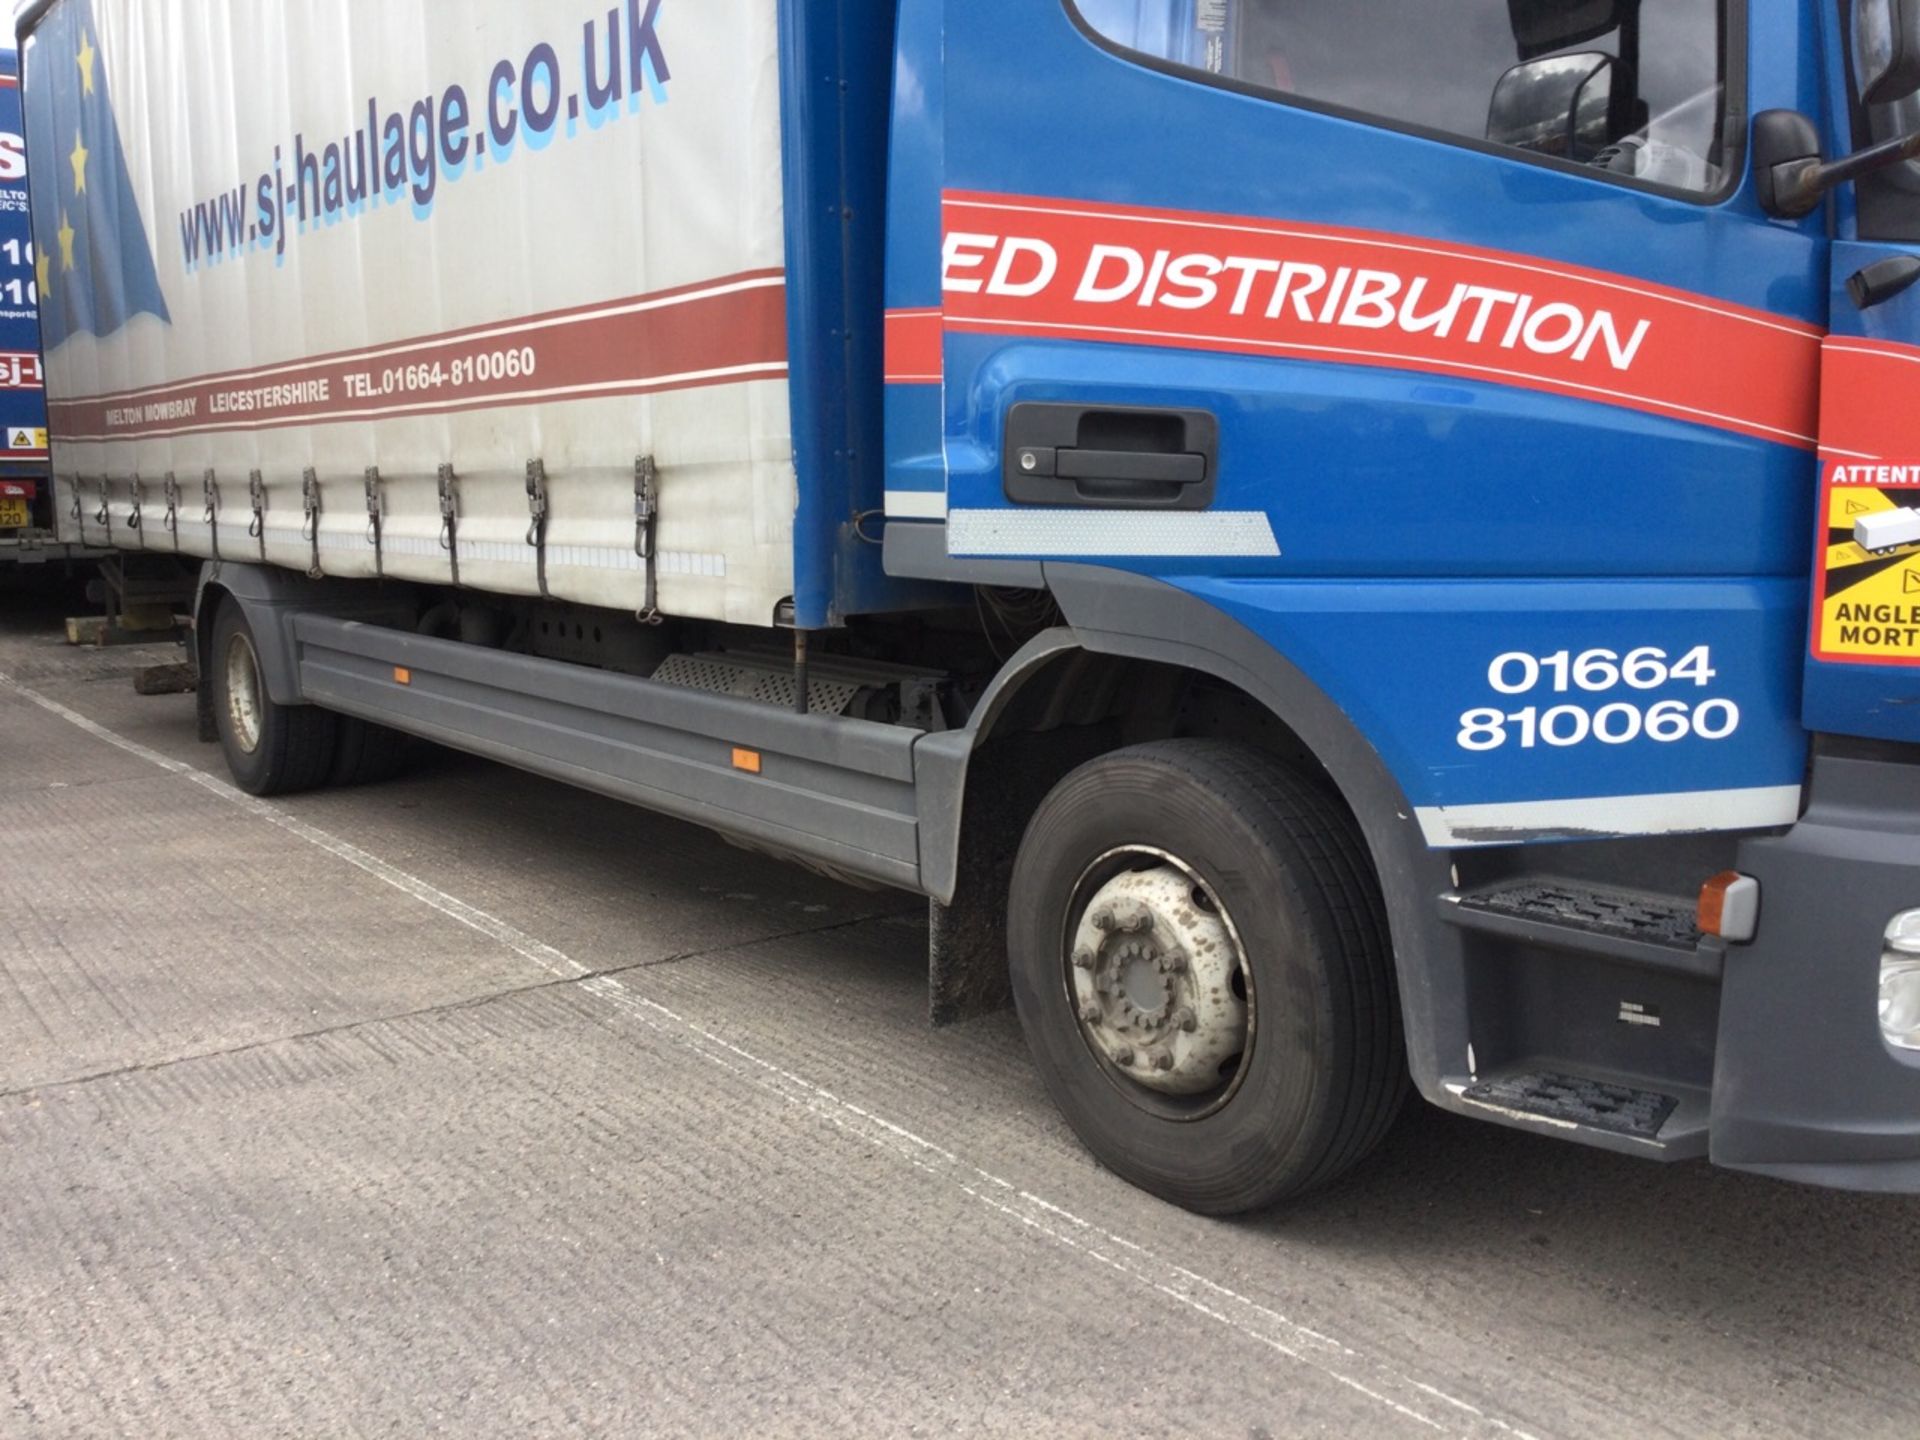 Mercedes ATEGO 4x2 Curtainsider Rigid Truck With Dhollandia 15ookg Tail Lift, Mot Until 30/09/24 57 - Image 3 of 4